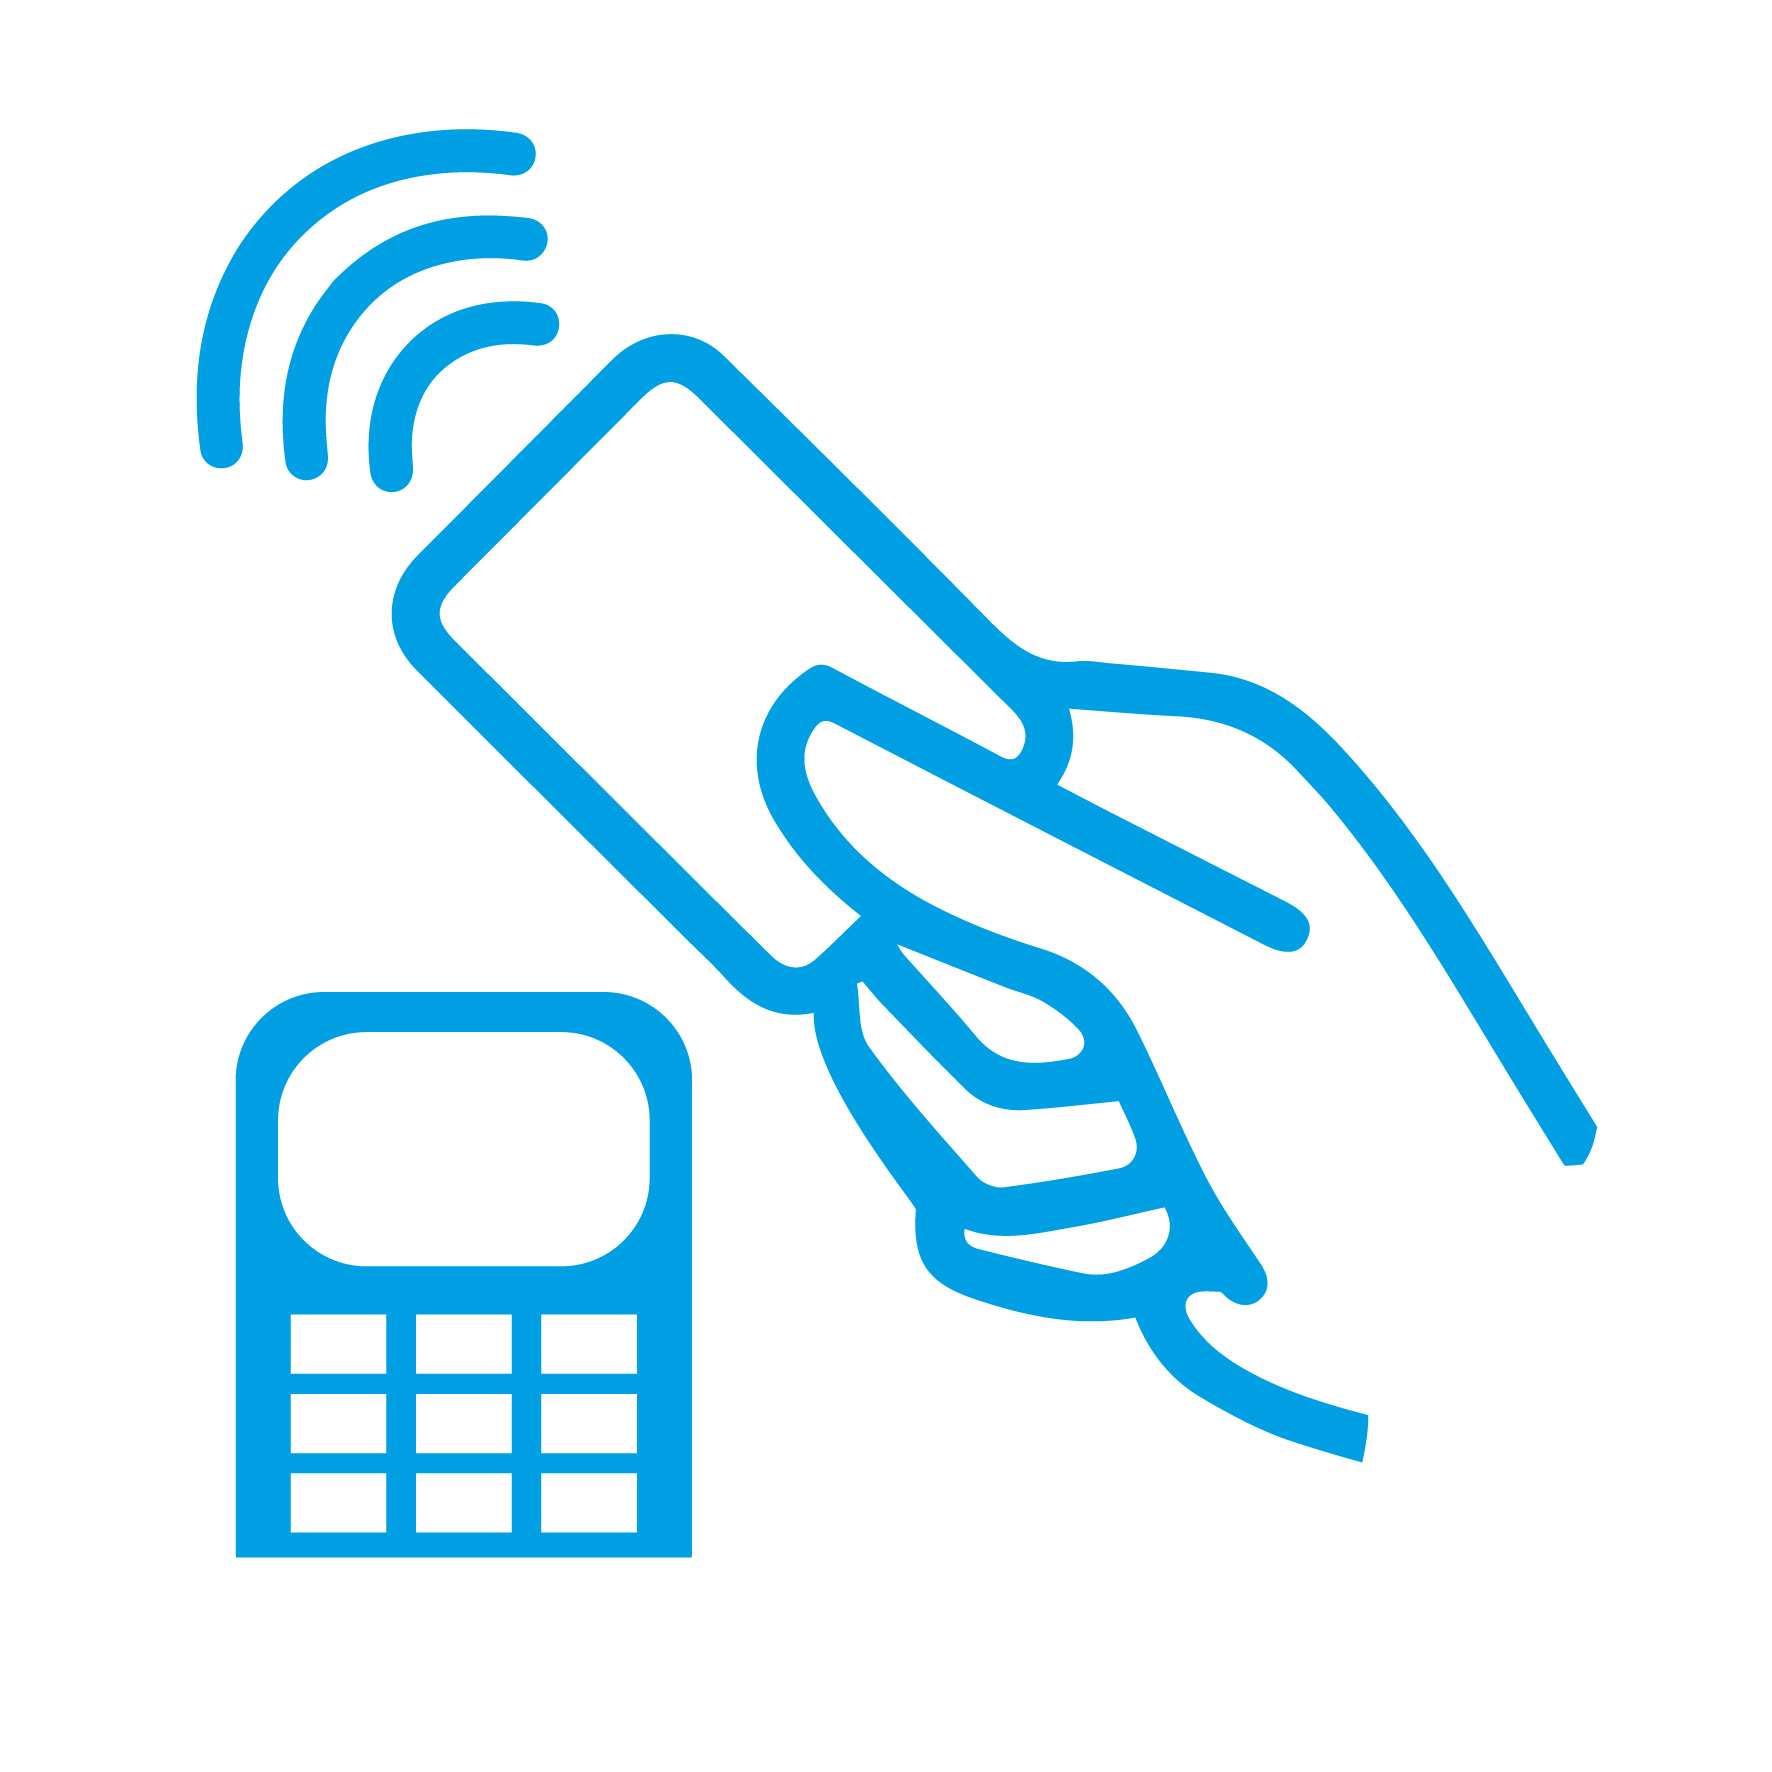 Covid Response Icons Cyan Contactless